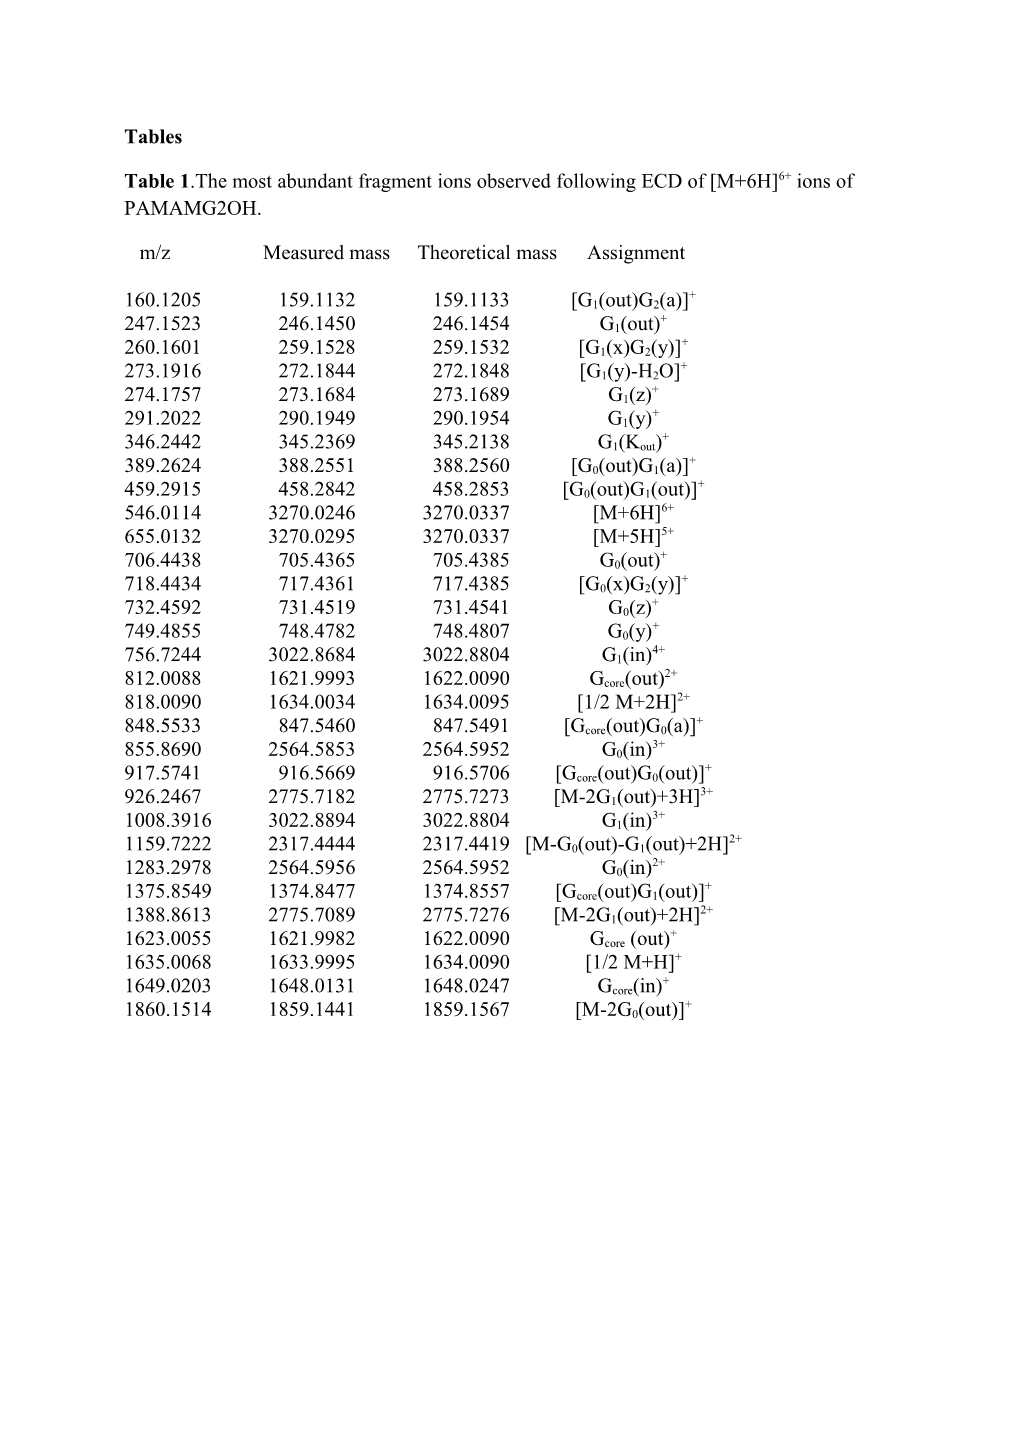 Table 1.The Most Abundant Fragment Ions Observed Following ECD of M+6H 6+ Ions of PAMAMG2OH